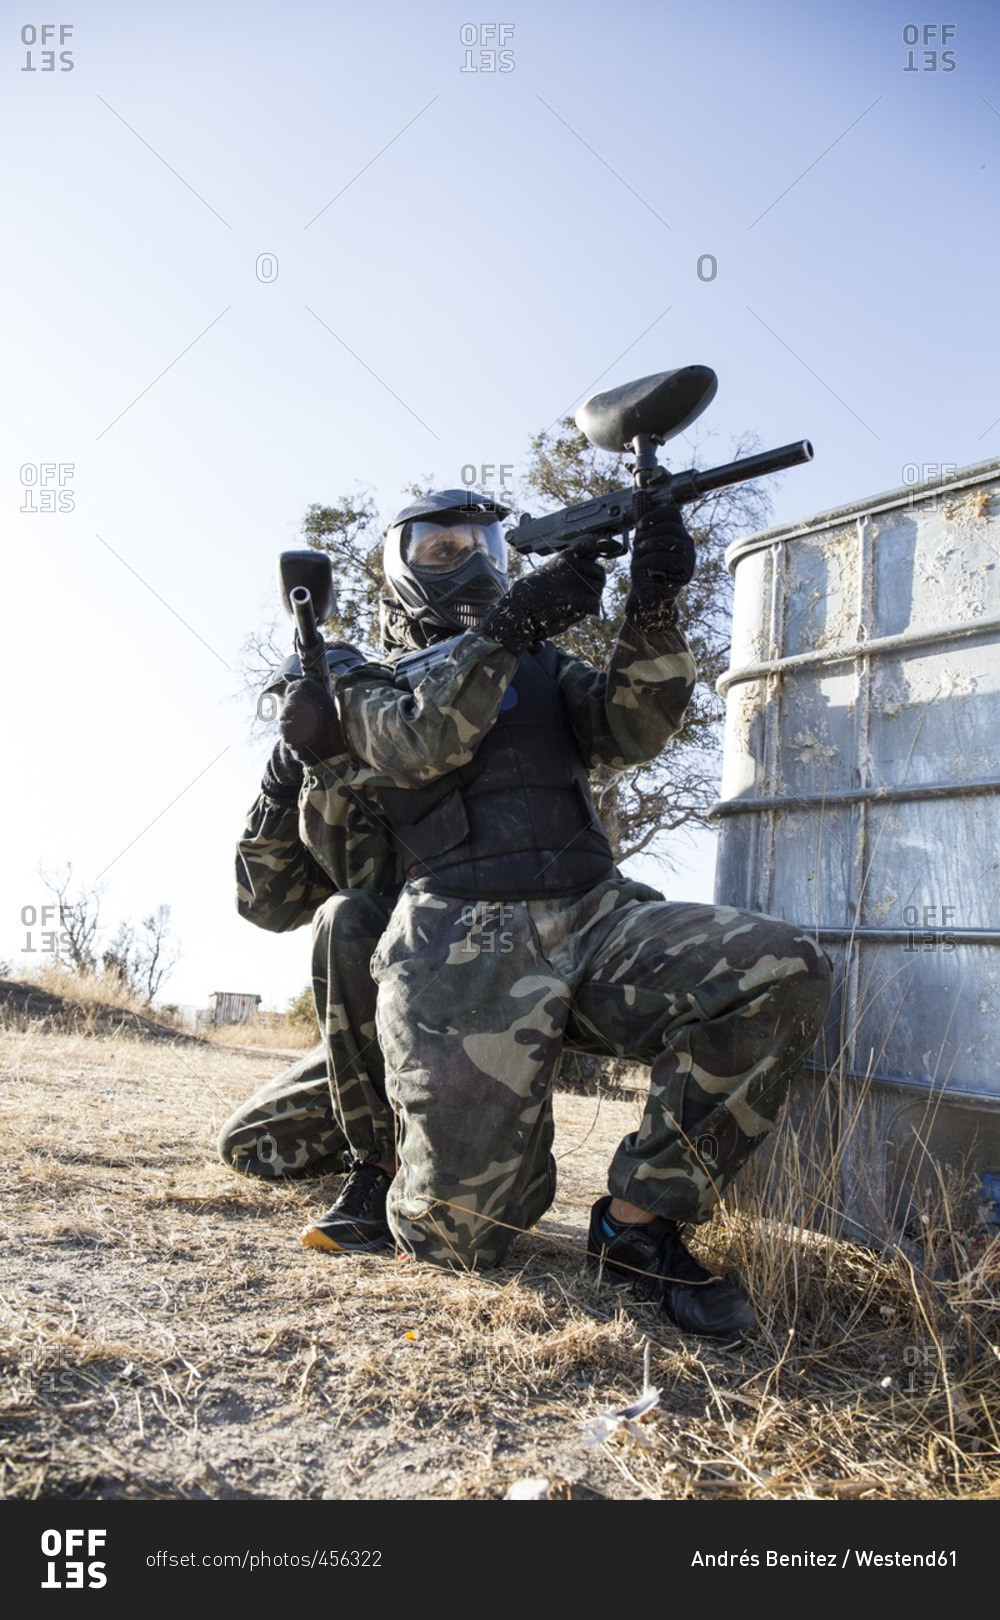 Paintball players aiming with paintball guns during a paintball game